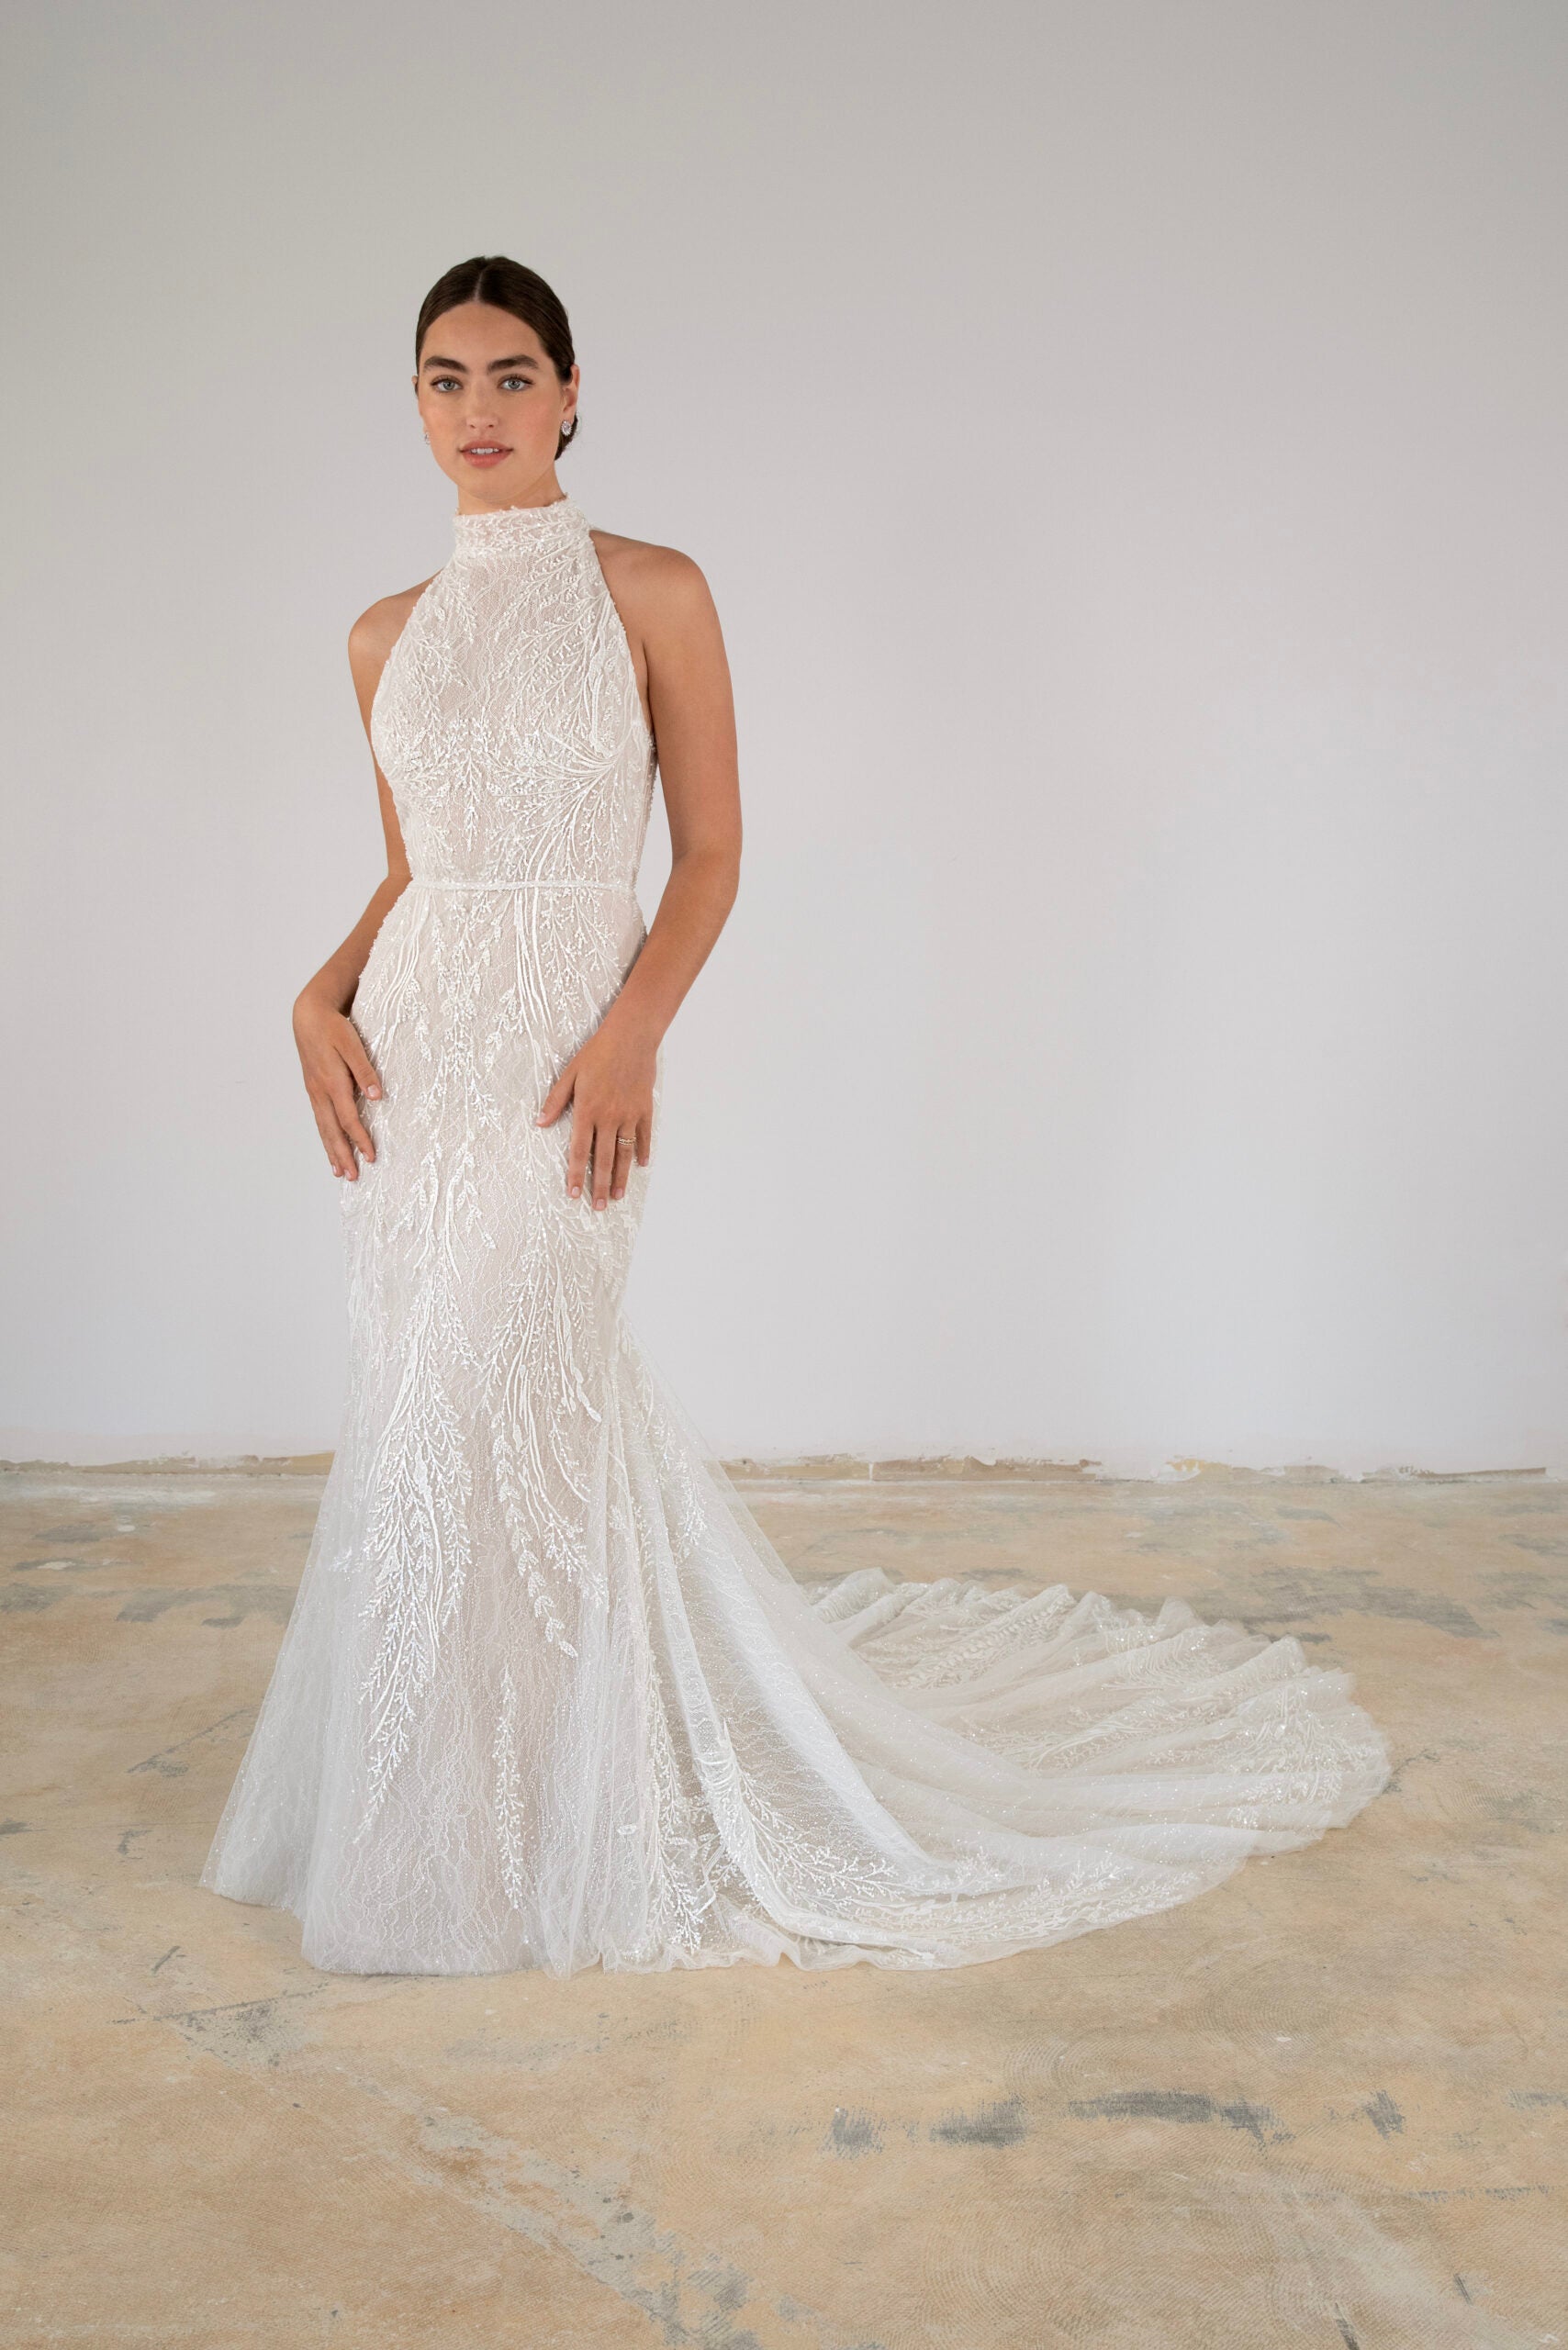 High-Neck Lace Sheath Gown by Martina Liana Luxe - Image 1